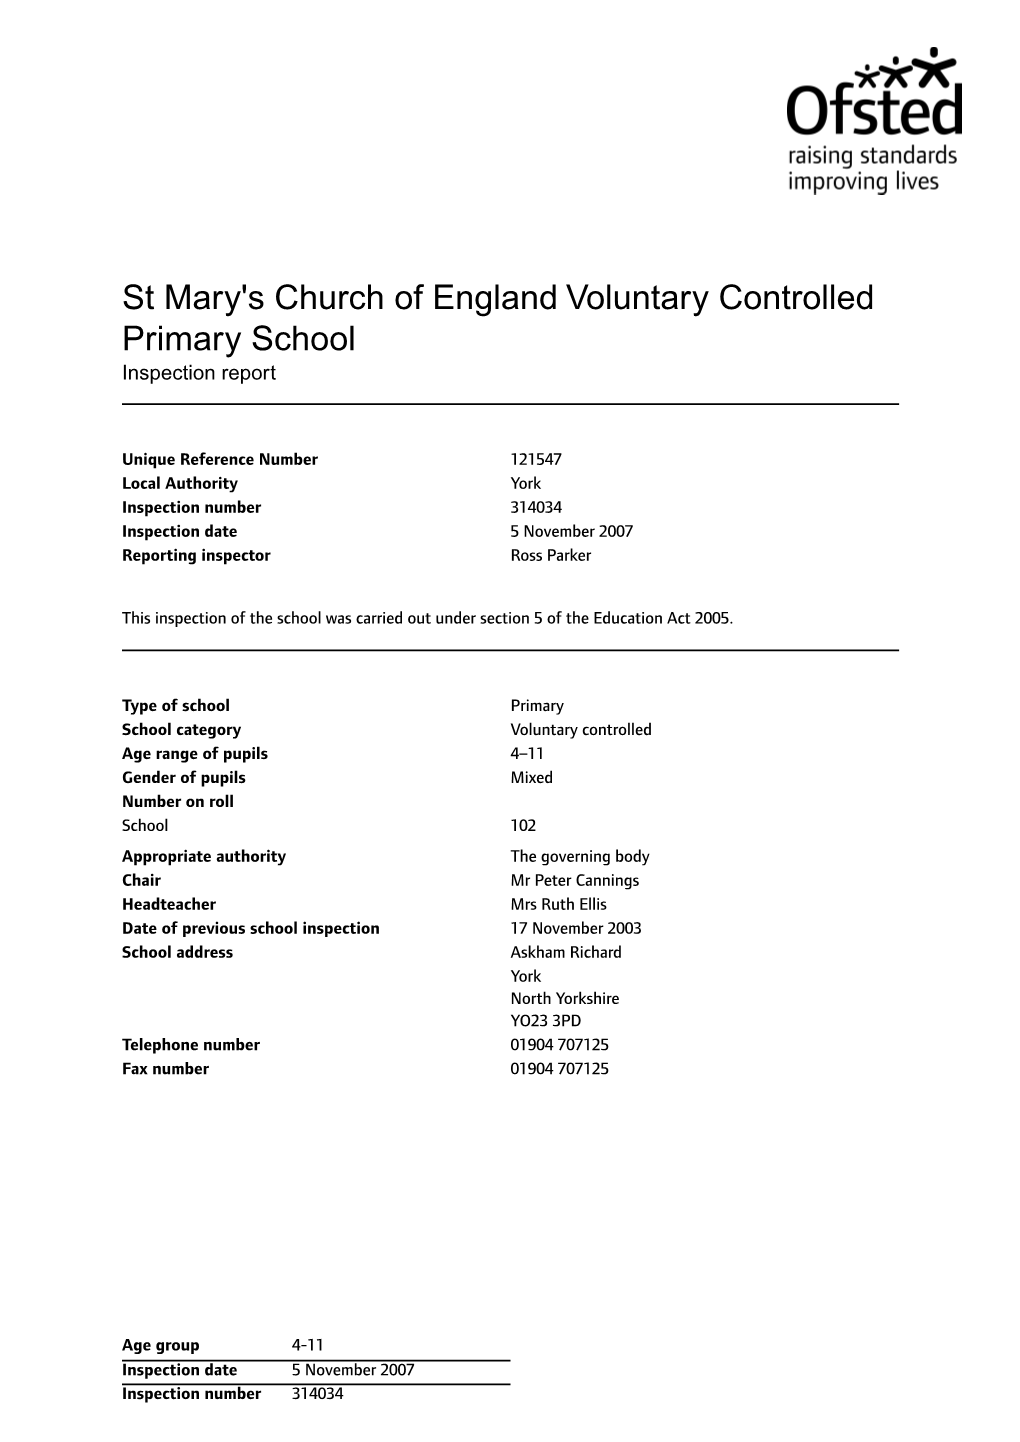 St Mary's Church of England Voluntary Controlled Primary School Inspection Report